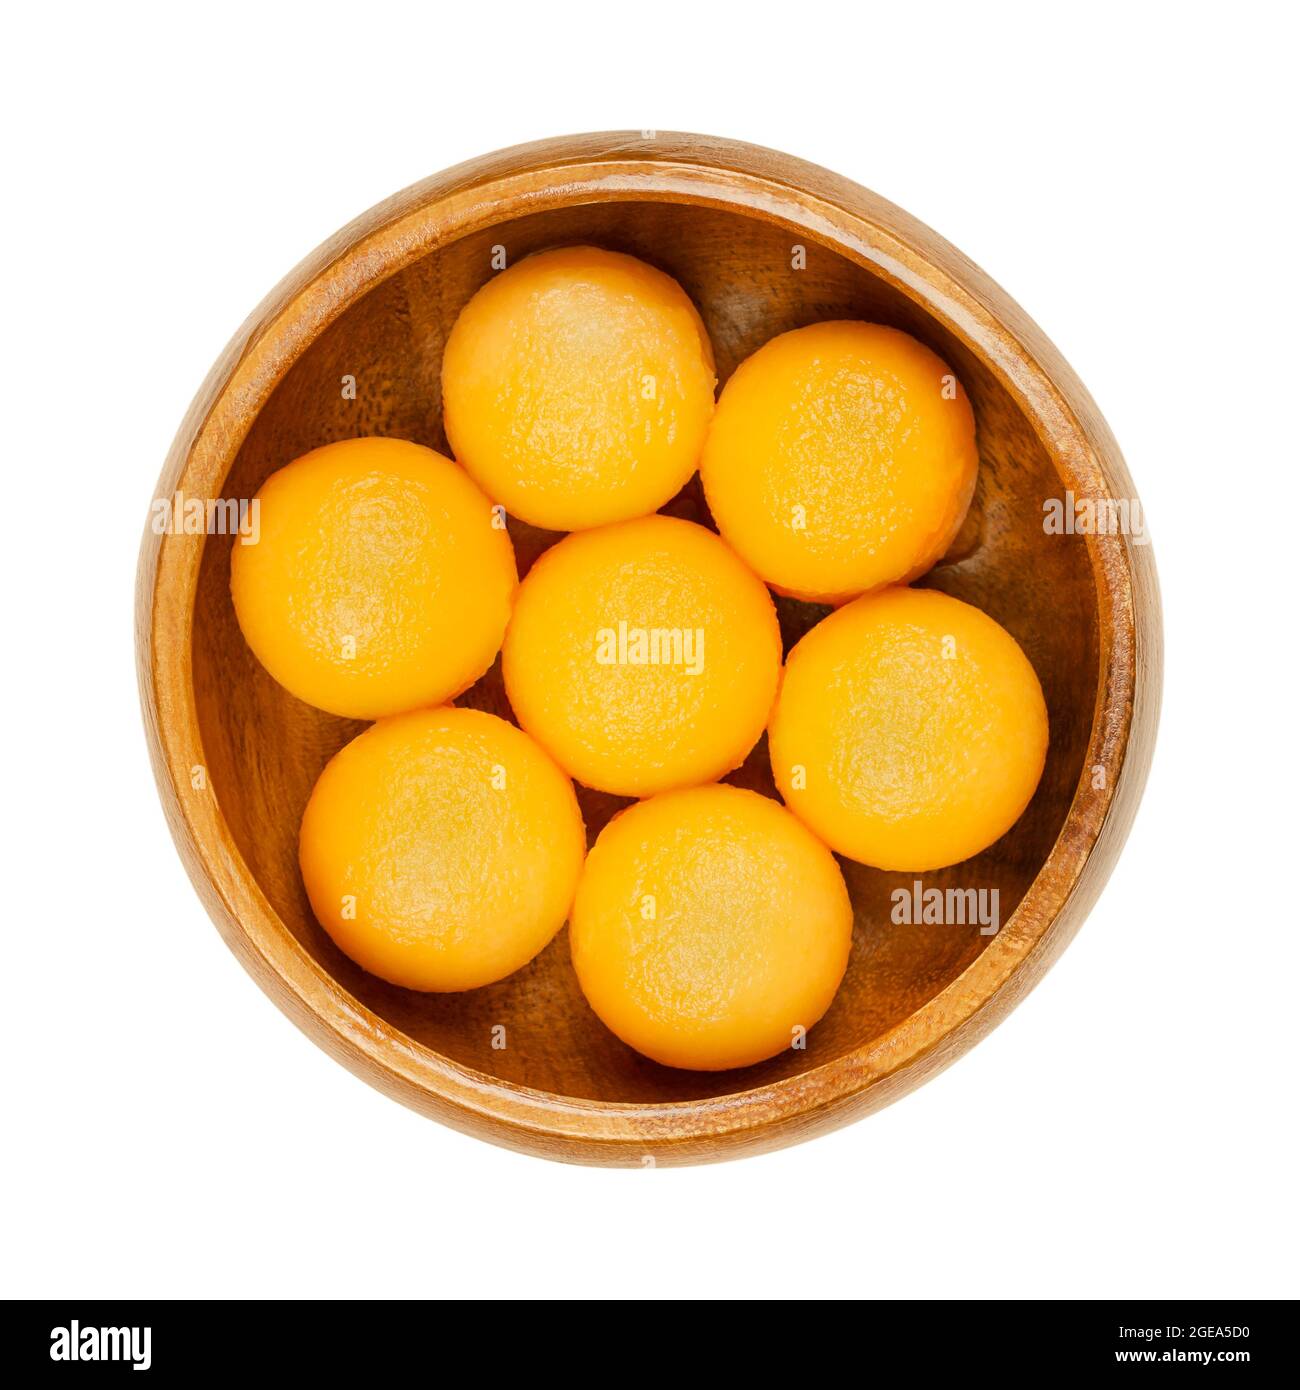 Honey Cantaloupe melon balls in a wooden bowl. Freshly cut out with a melon baller, ready-to-eat sweet spheres of a ripe fruit of a hybrid melon. Stock Photo